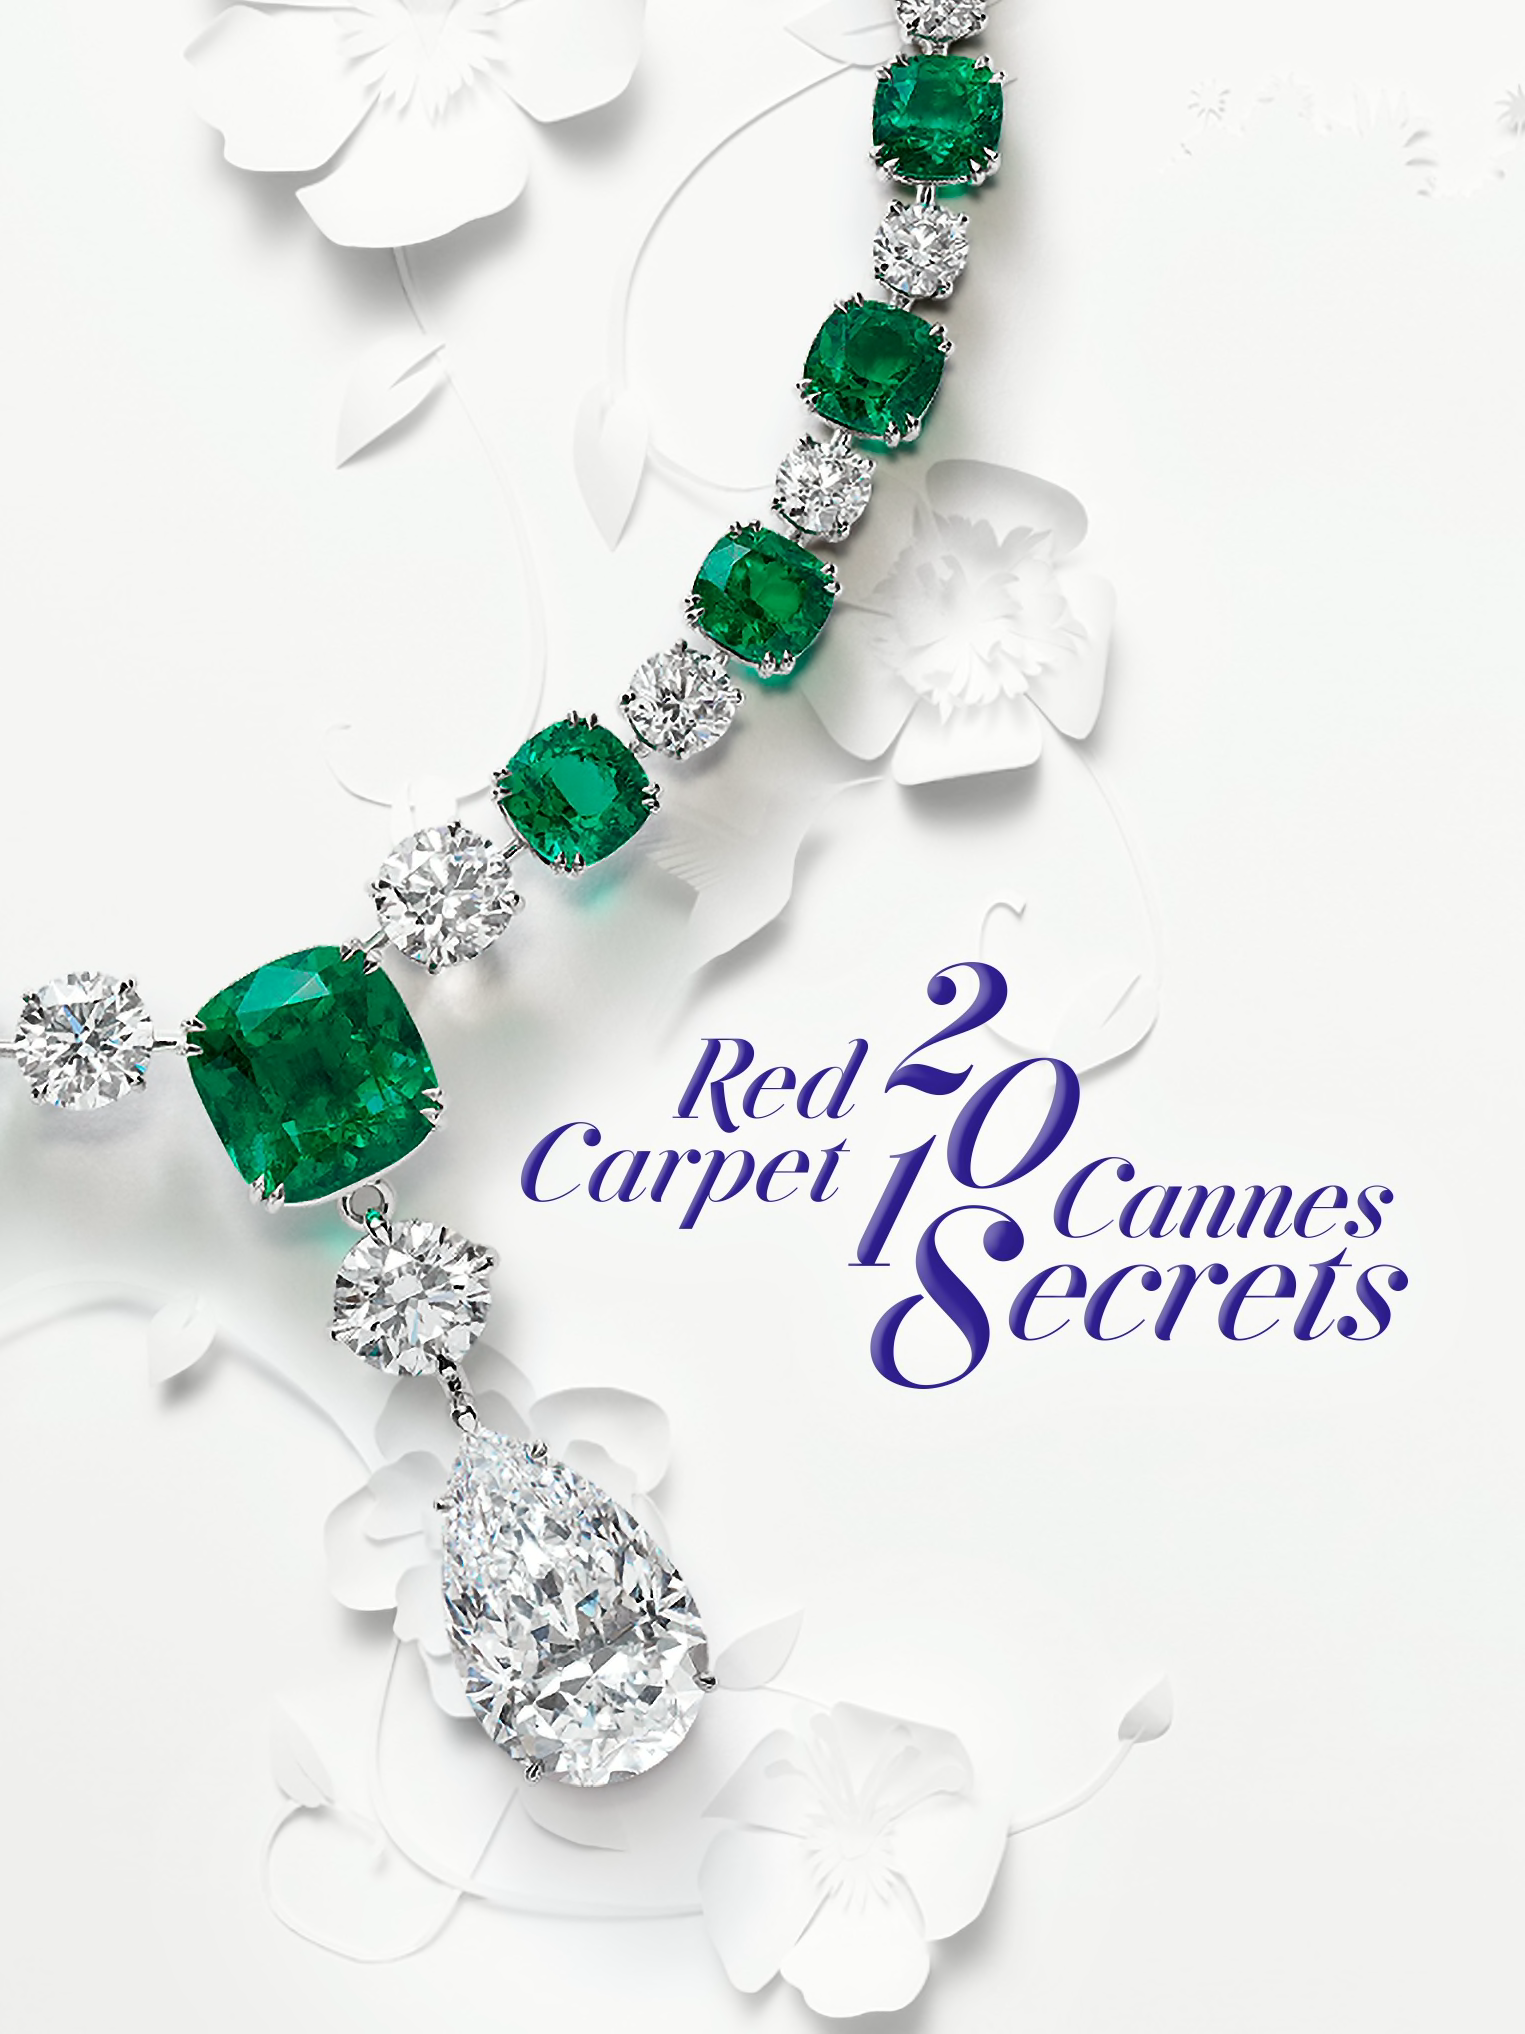 Header for Chopard's Red Carpet Collection 2018